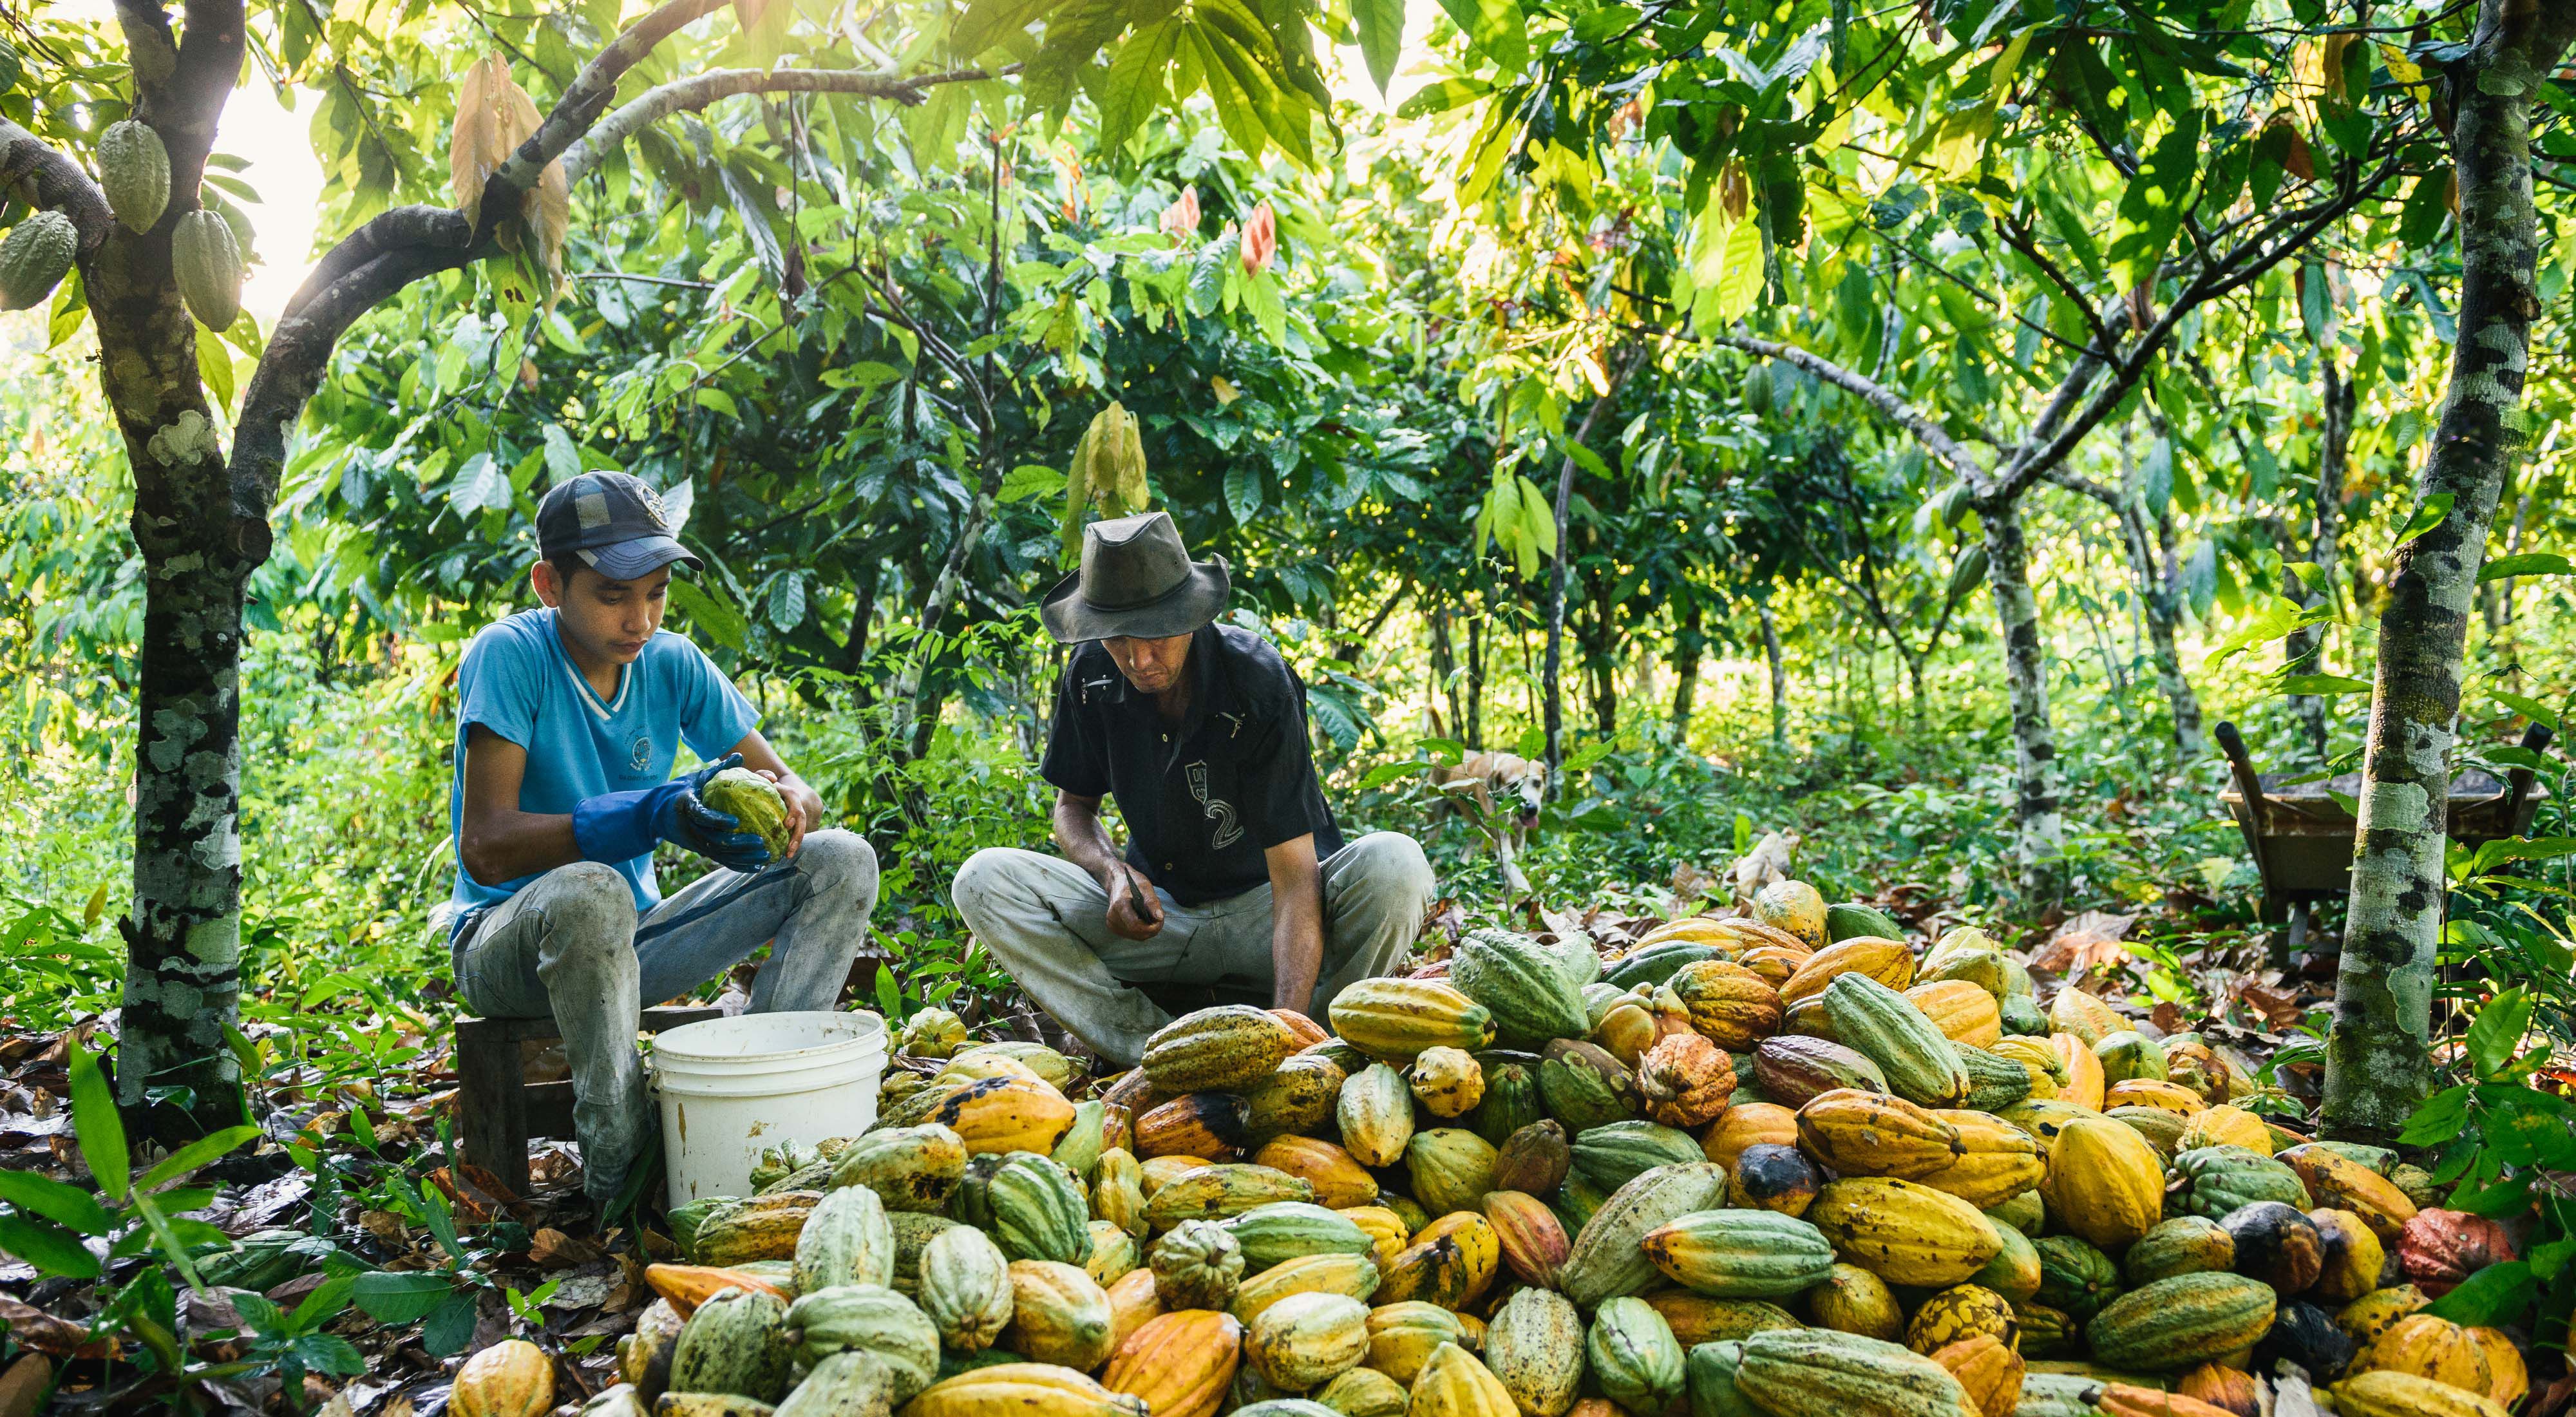 Cacao farmers work under the shade of trees in Brazil